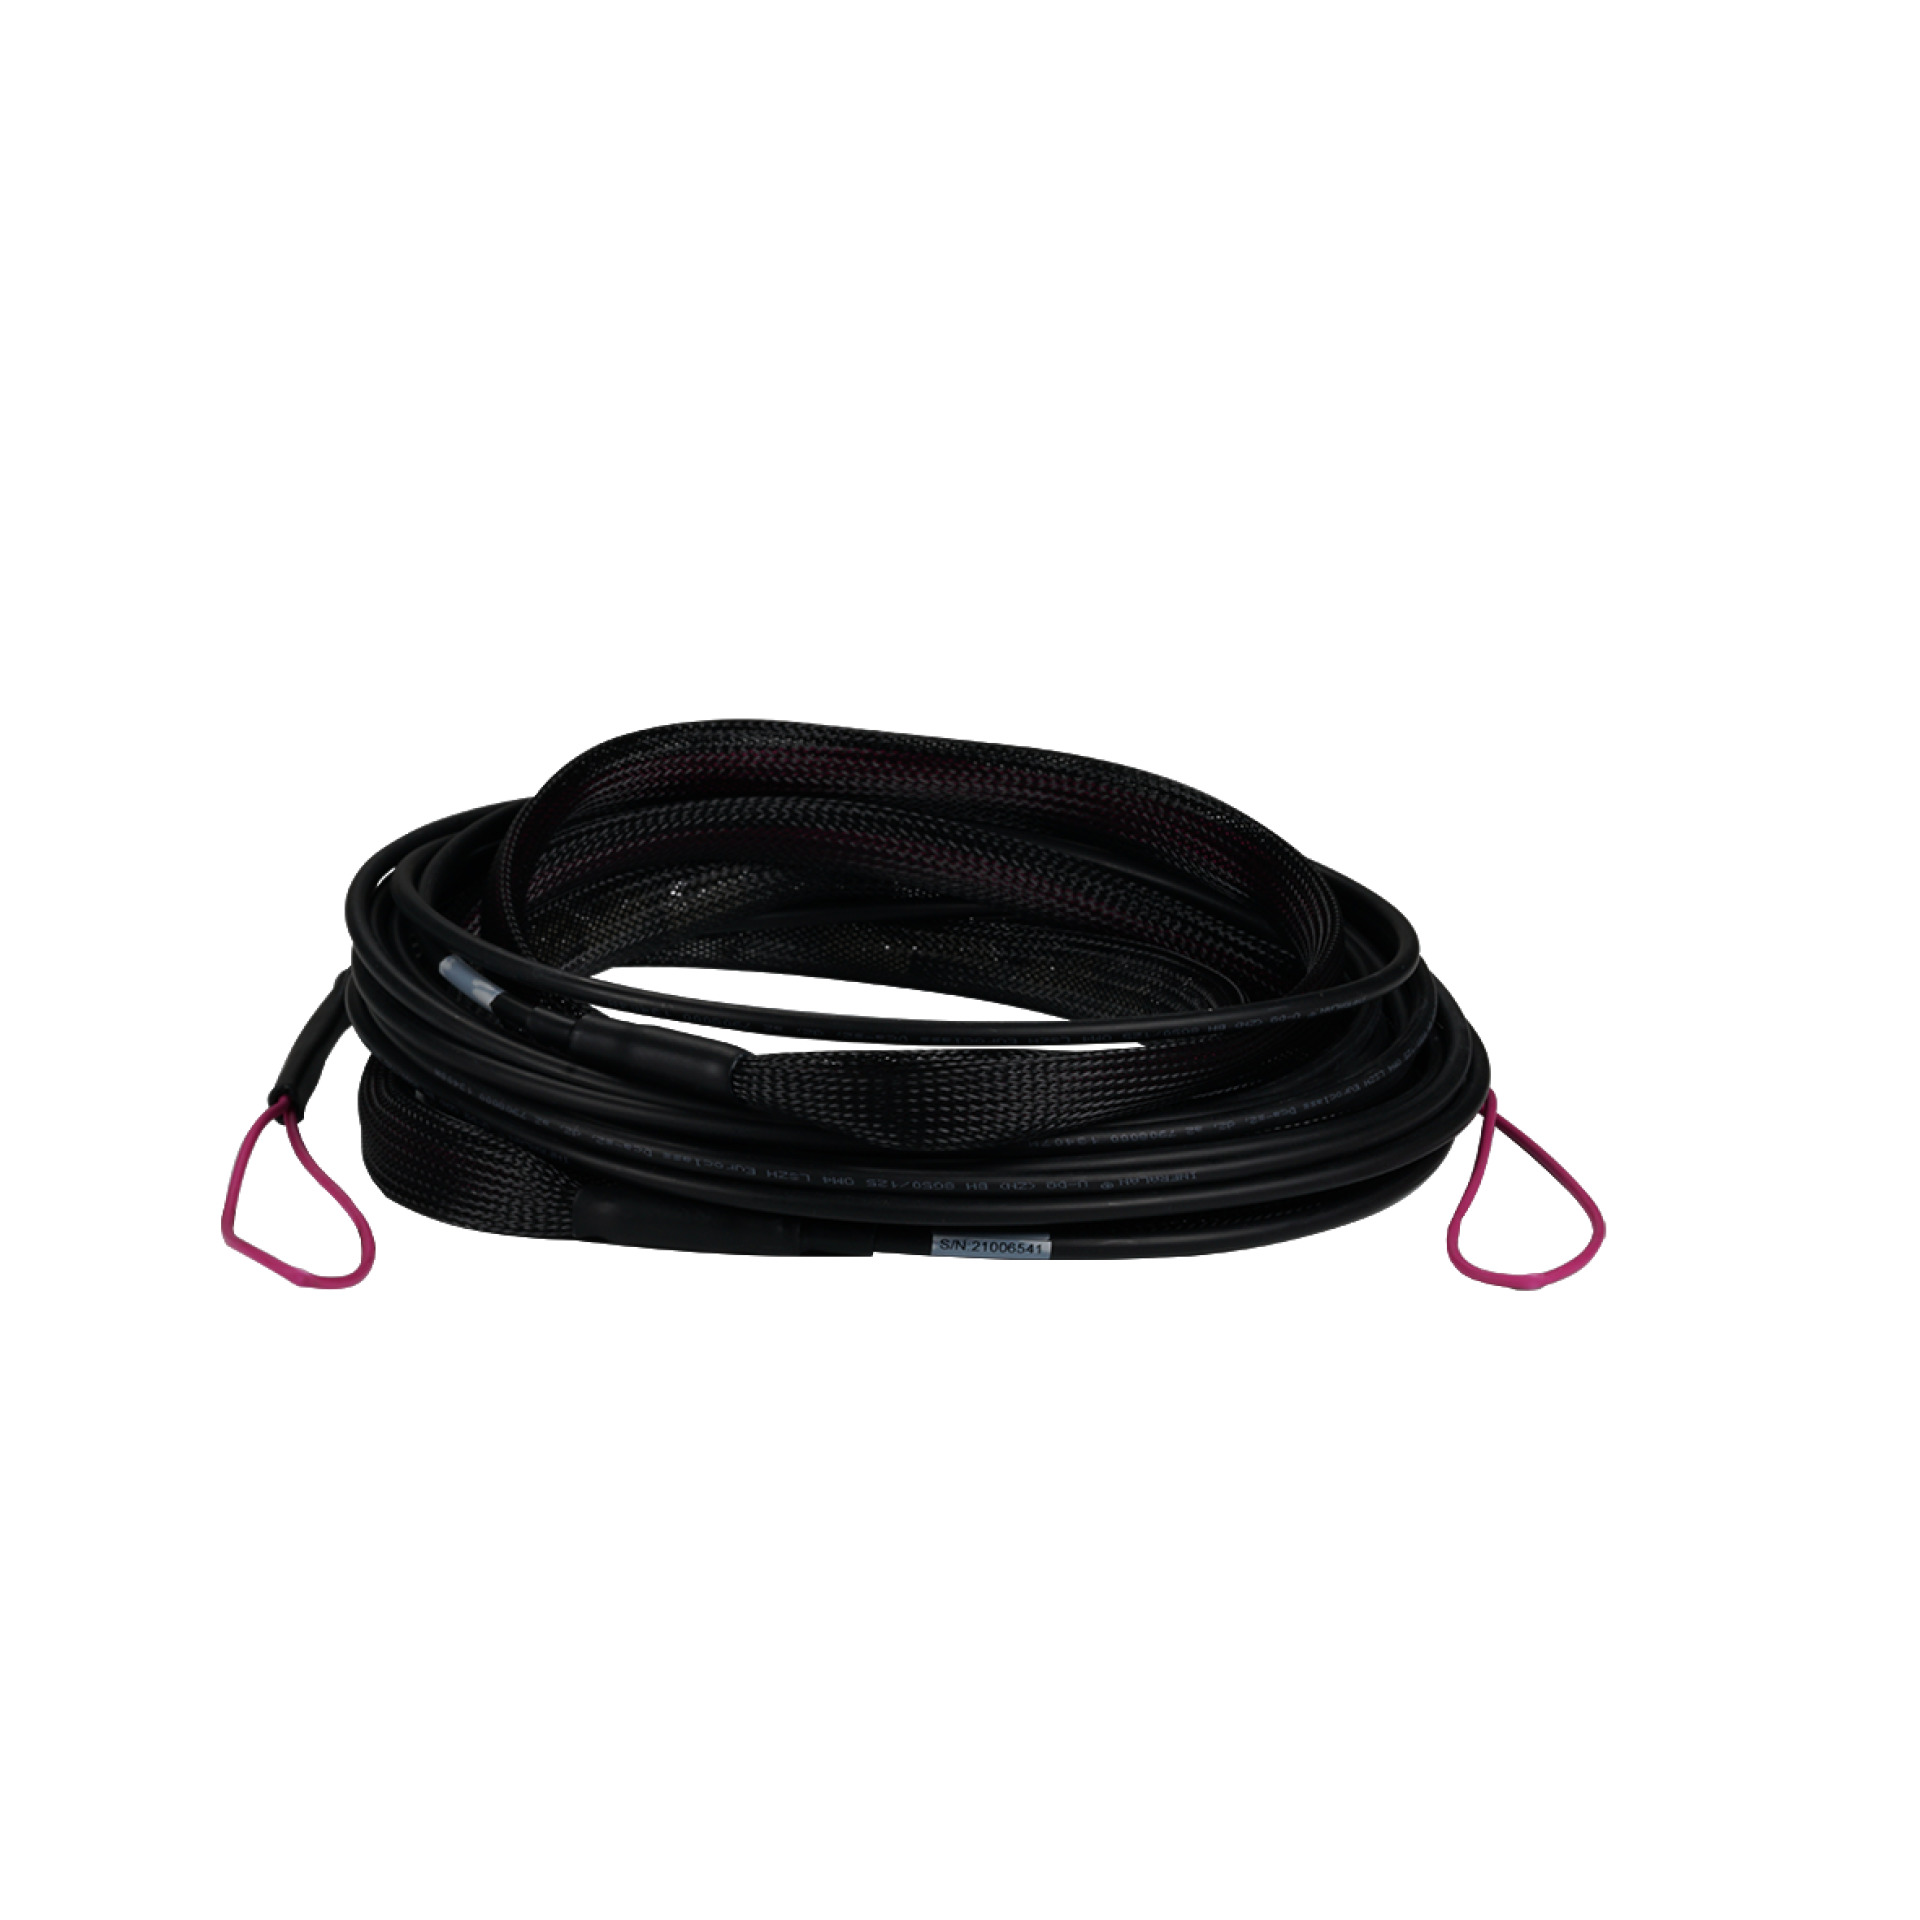 Trunk cable U-DQ(ZN)BH 4G 50/125, SC/SC OM4 130m